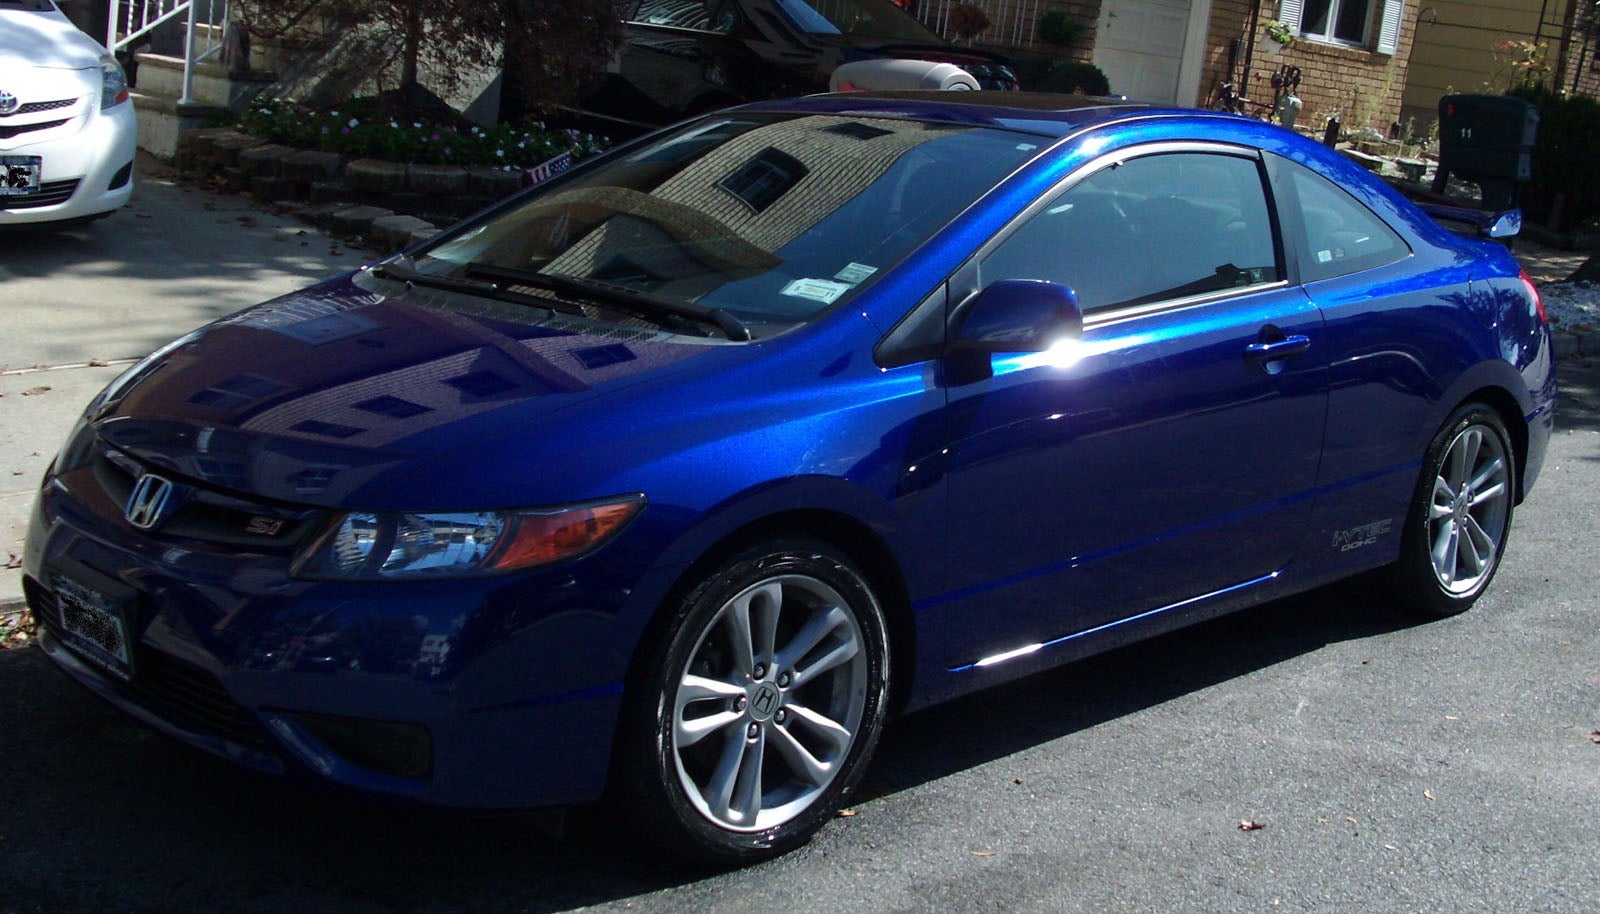 2007 Honda accord for sale in new york #2